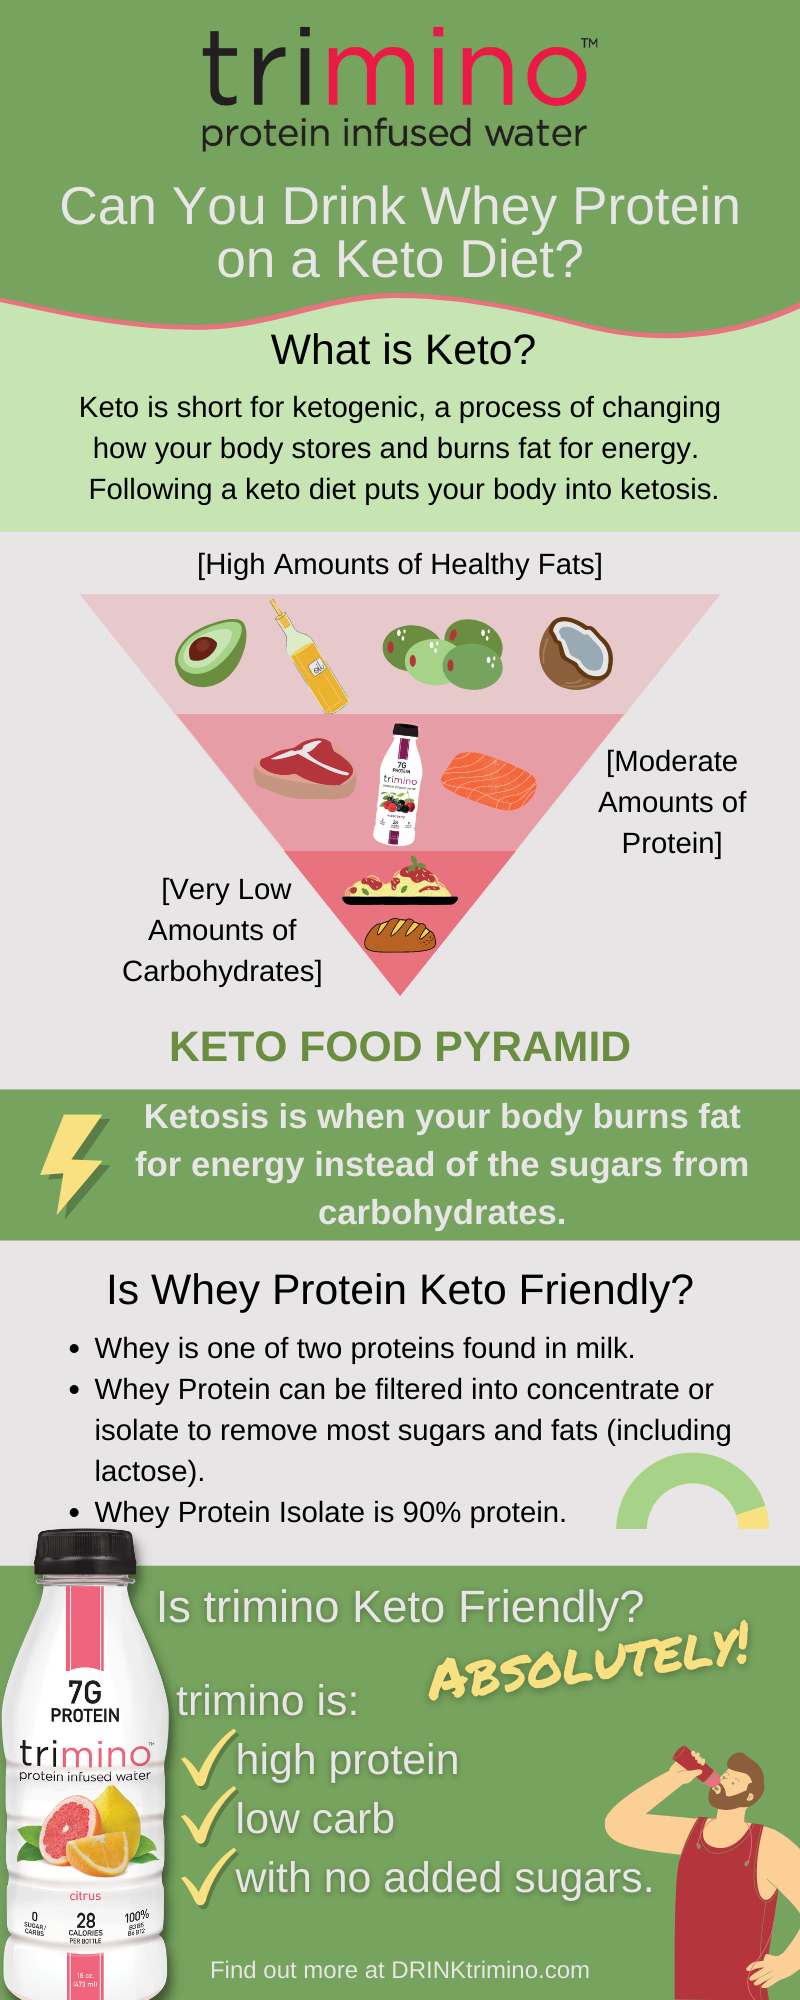 Keto tips for trimino - protein infused water